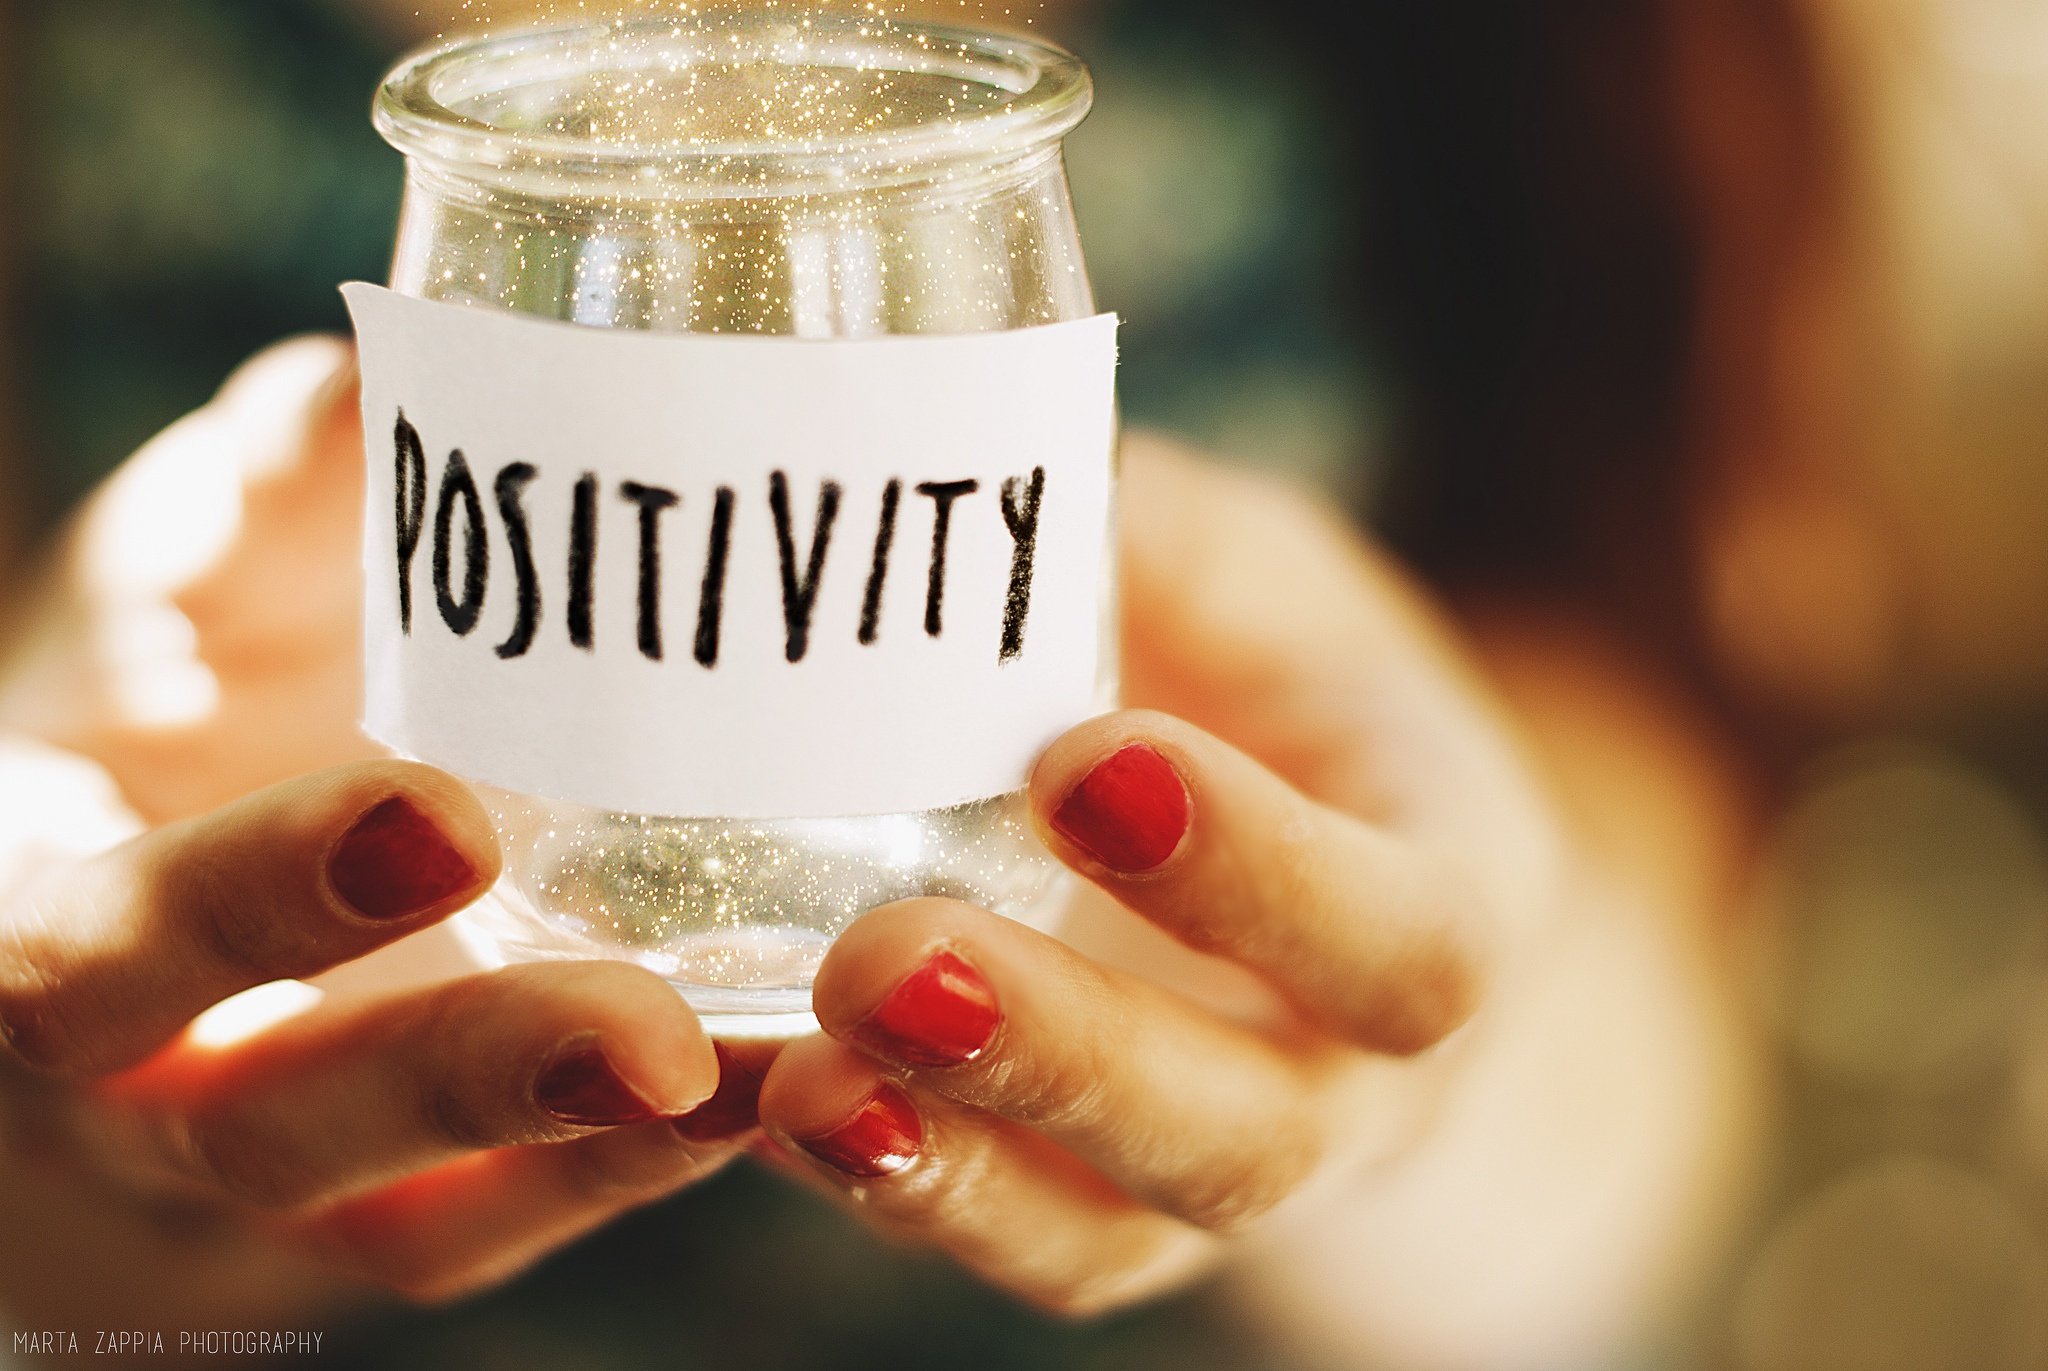 5 Ways To Create A Healthy And Positive Mindset